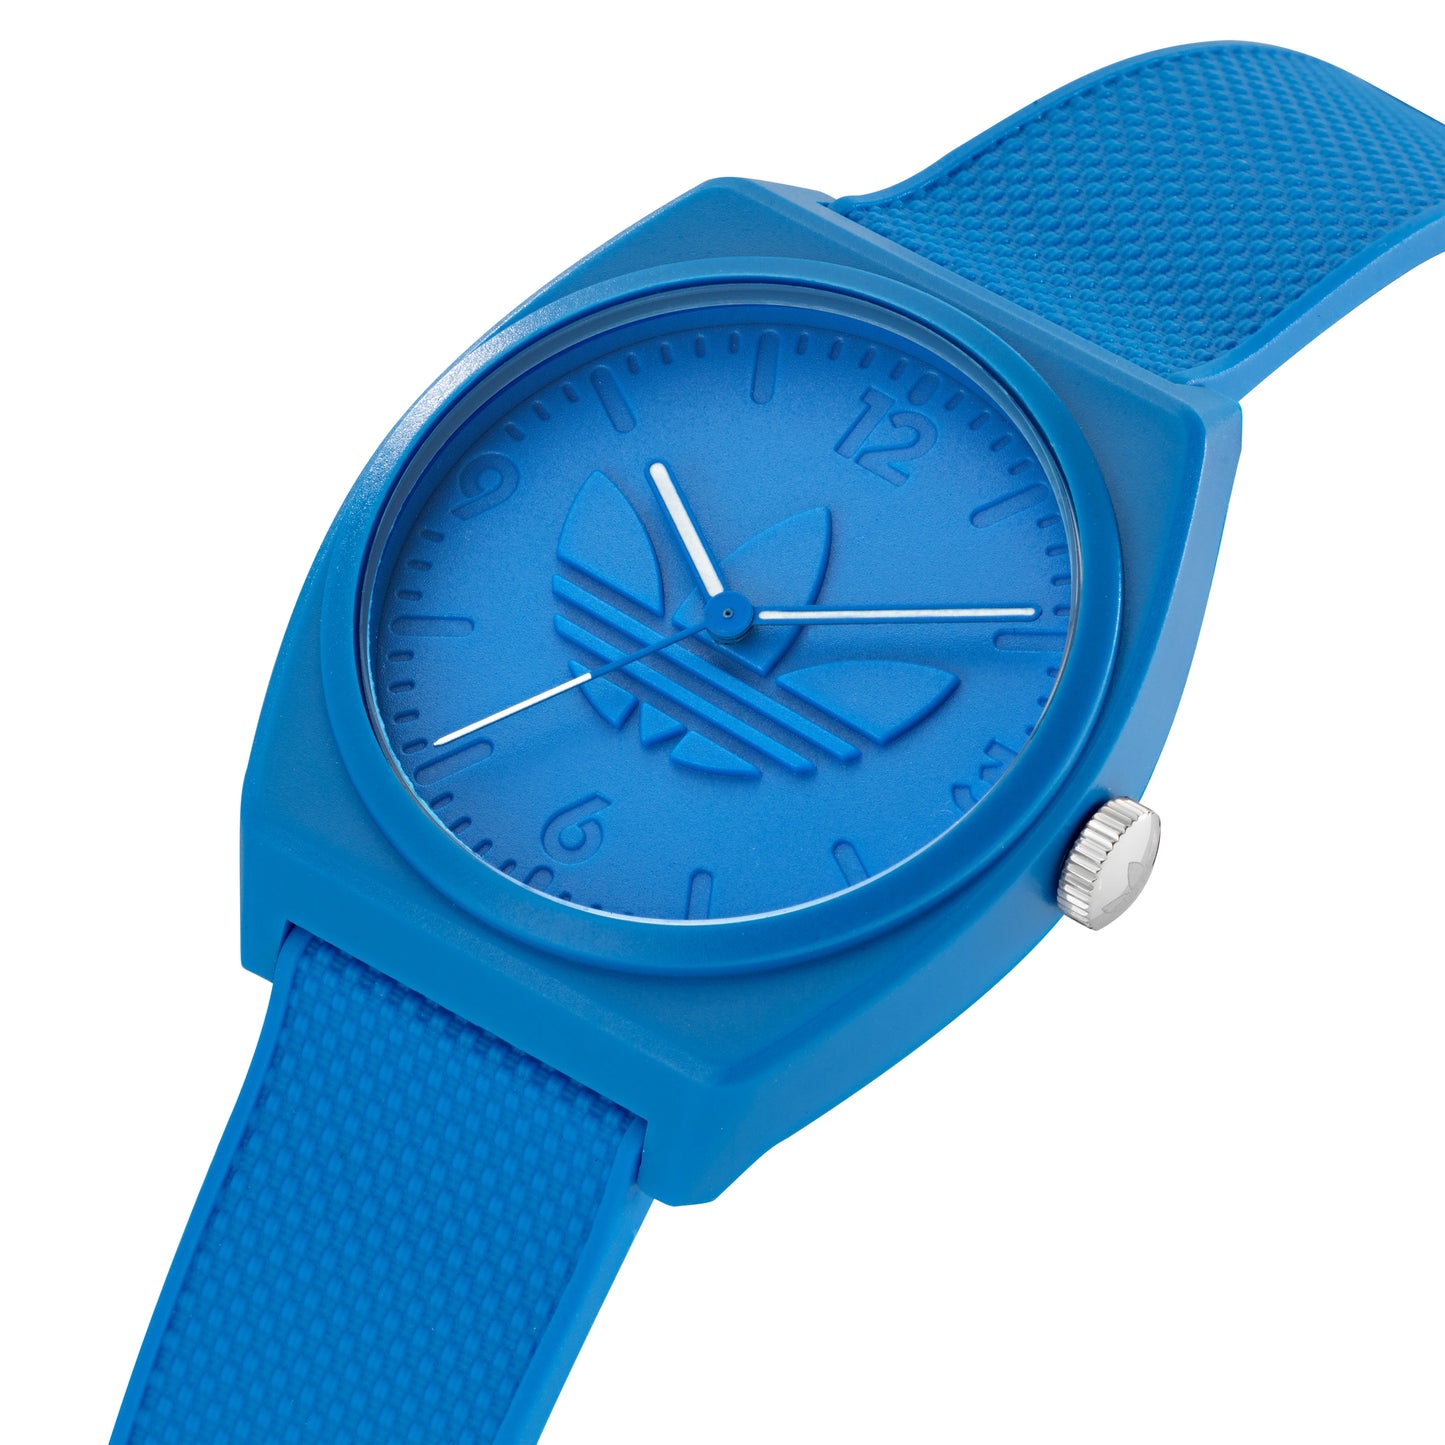 Project Two Unisex Watch